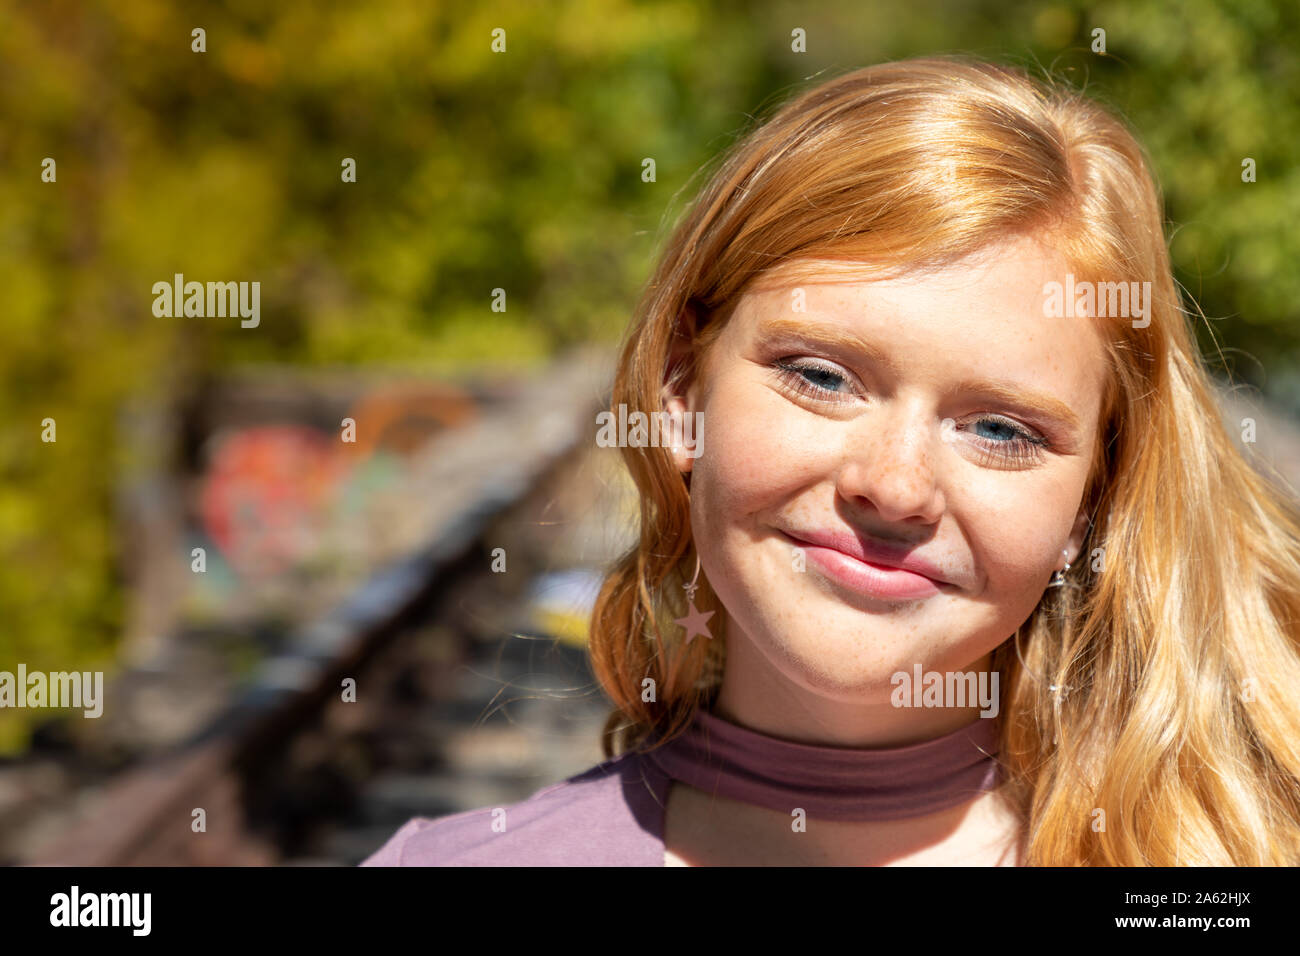 Portrait of gorgeous smiling teenage girl with red hair outdoors on sunny fall day Stock Photo